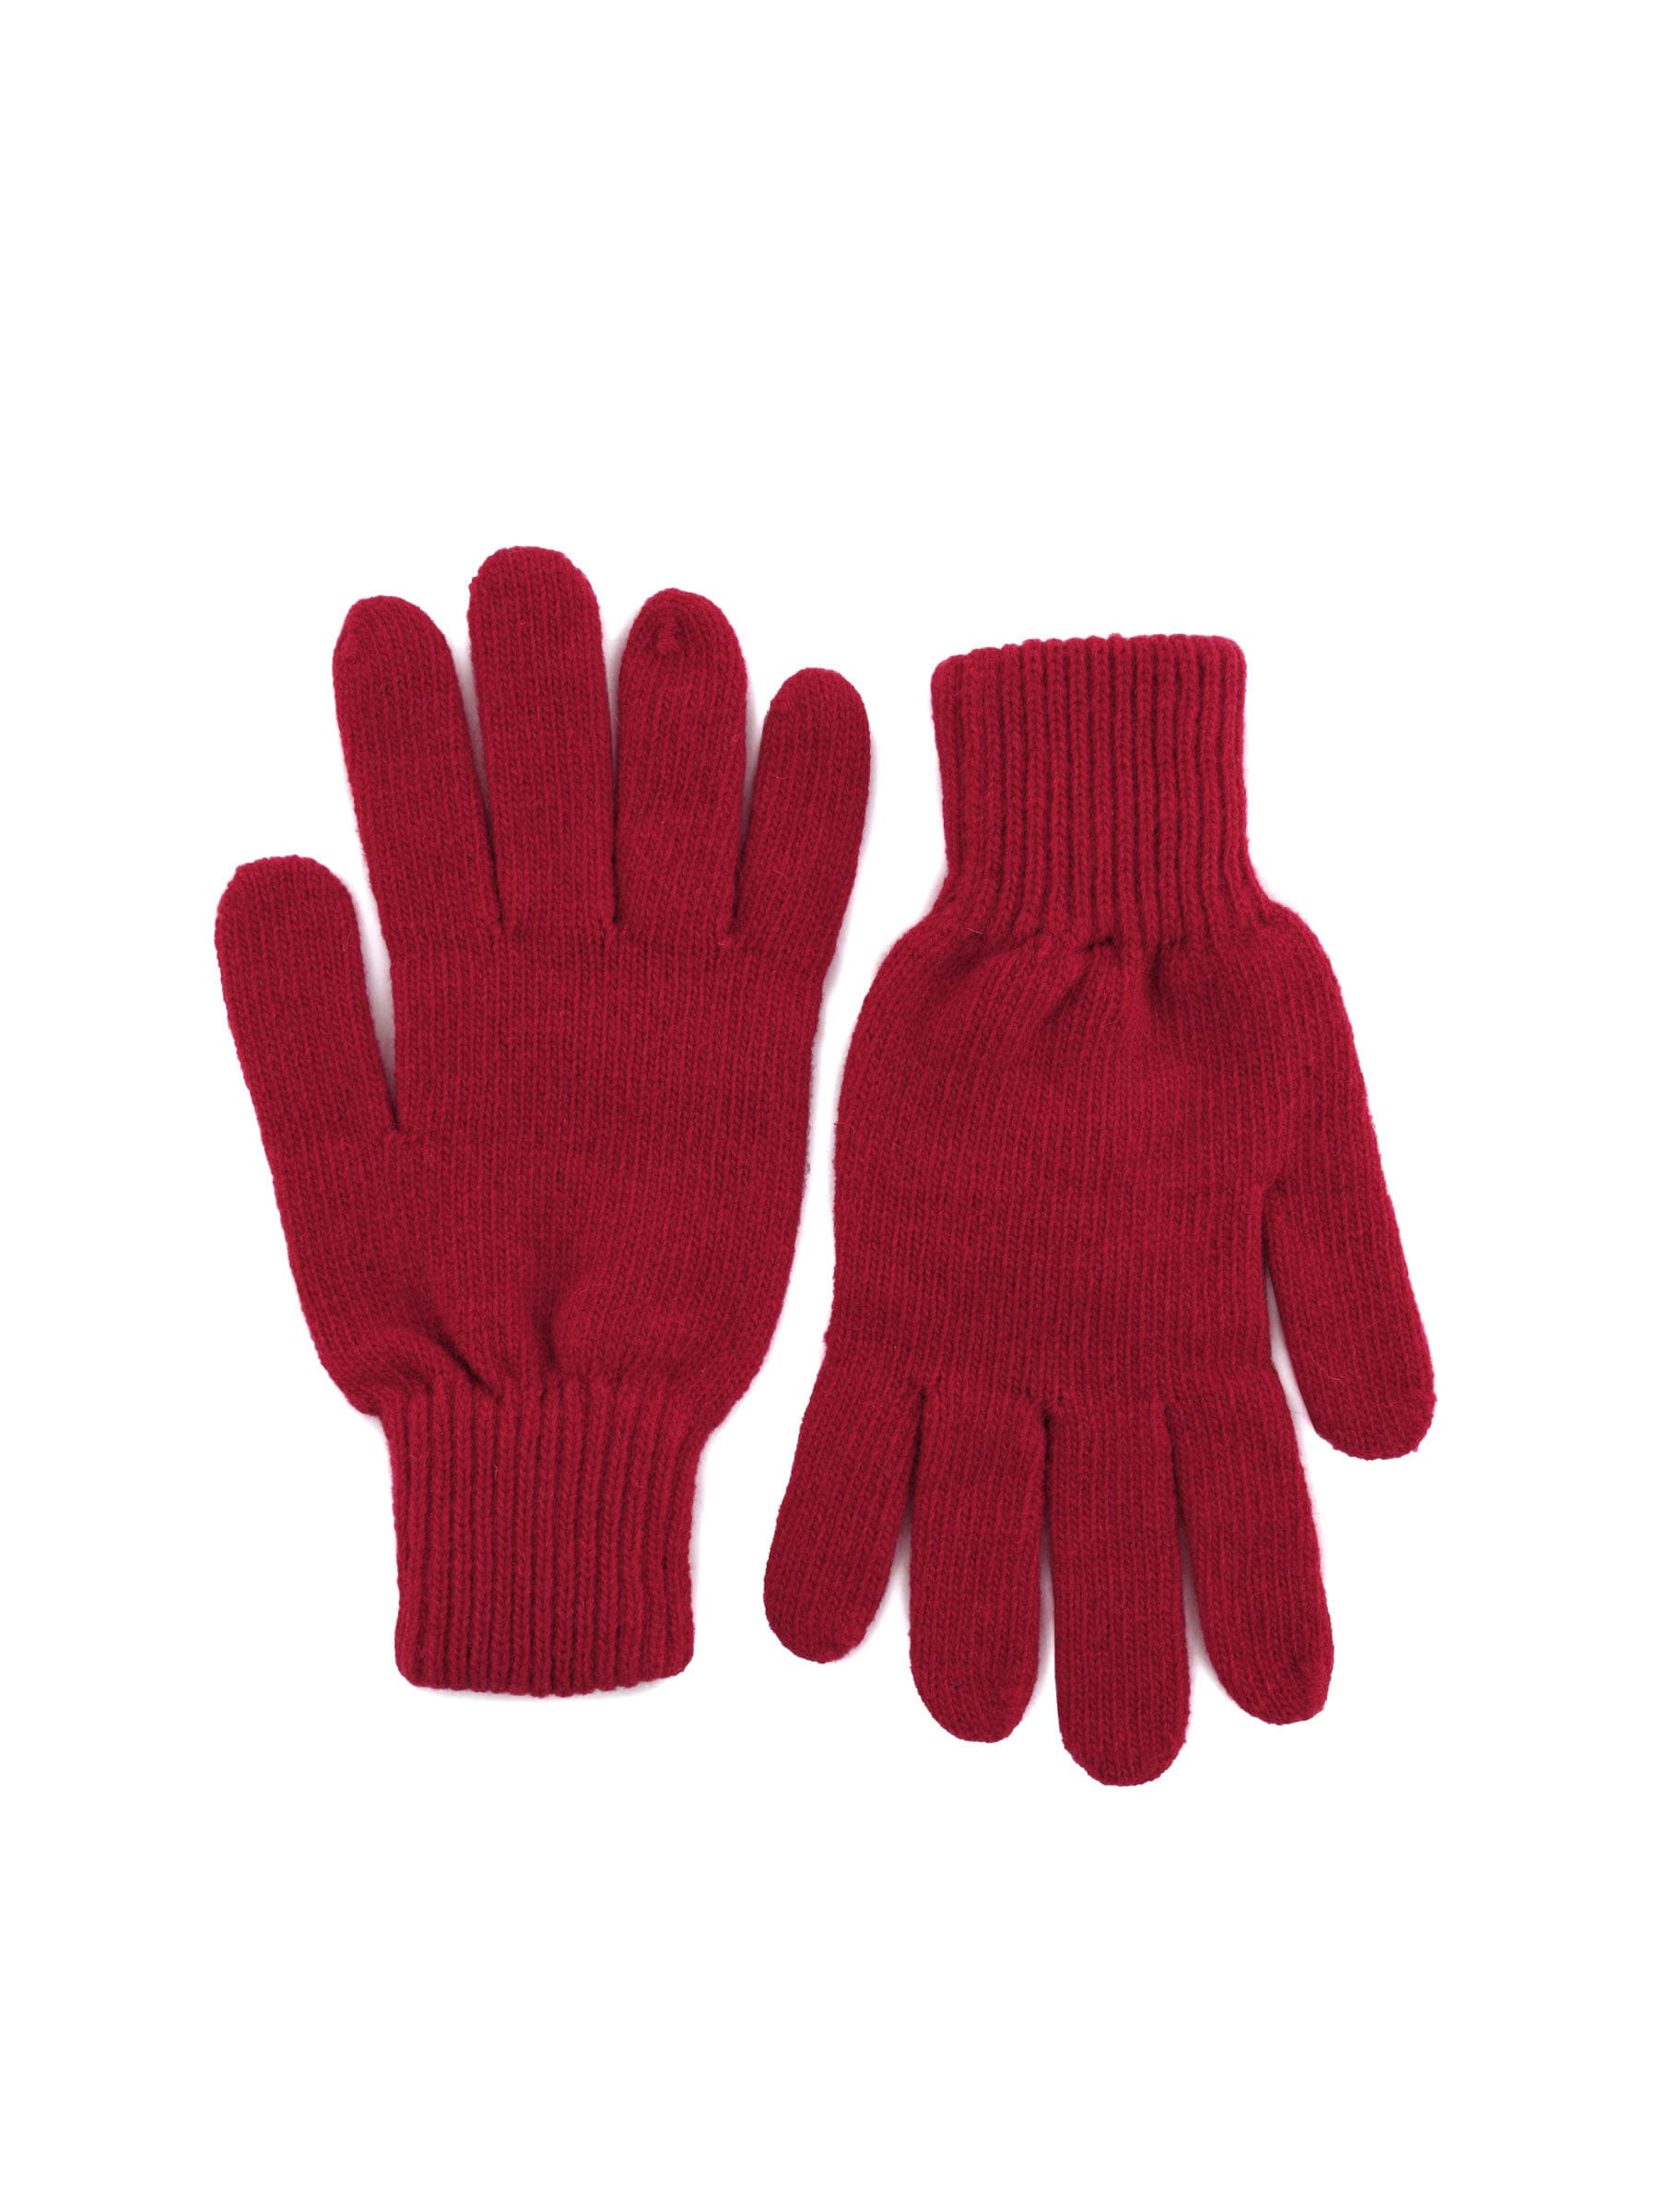 United Colors of Benetton Men Solid Red Gloves